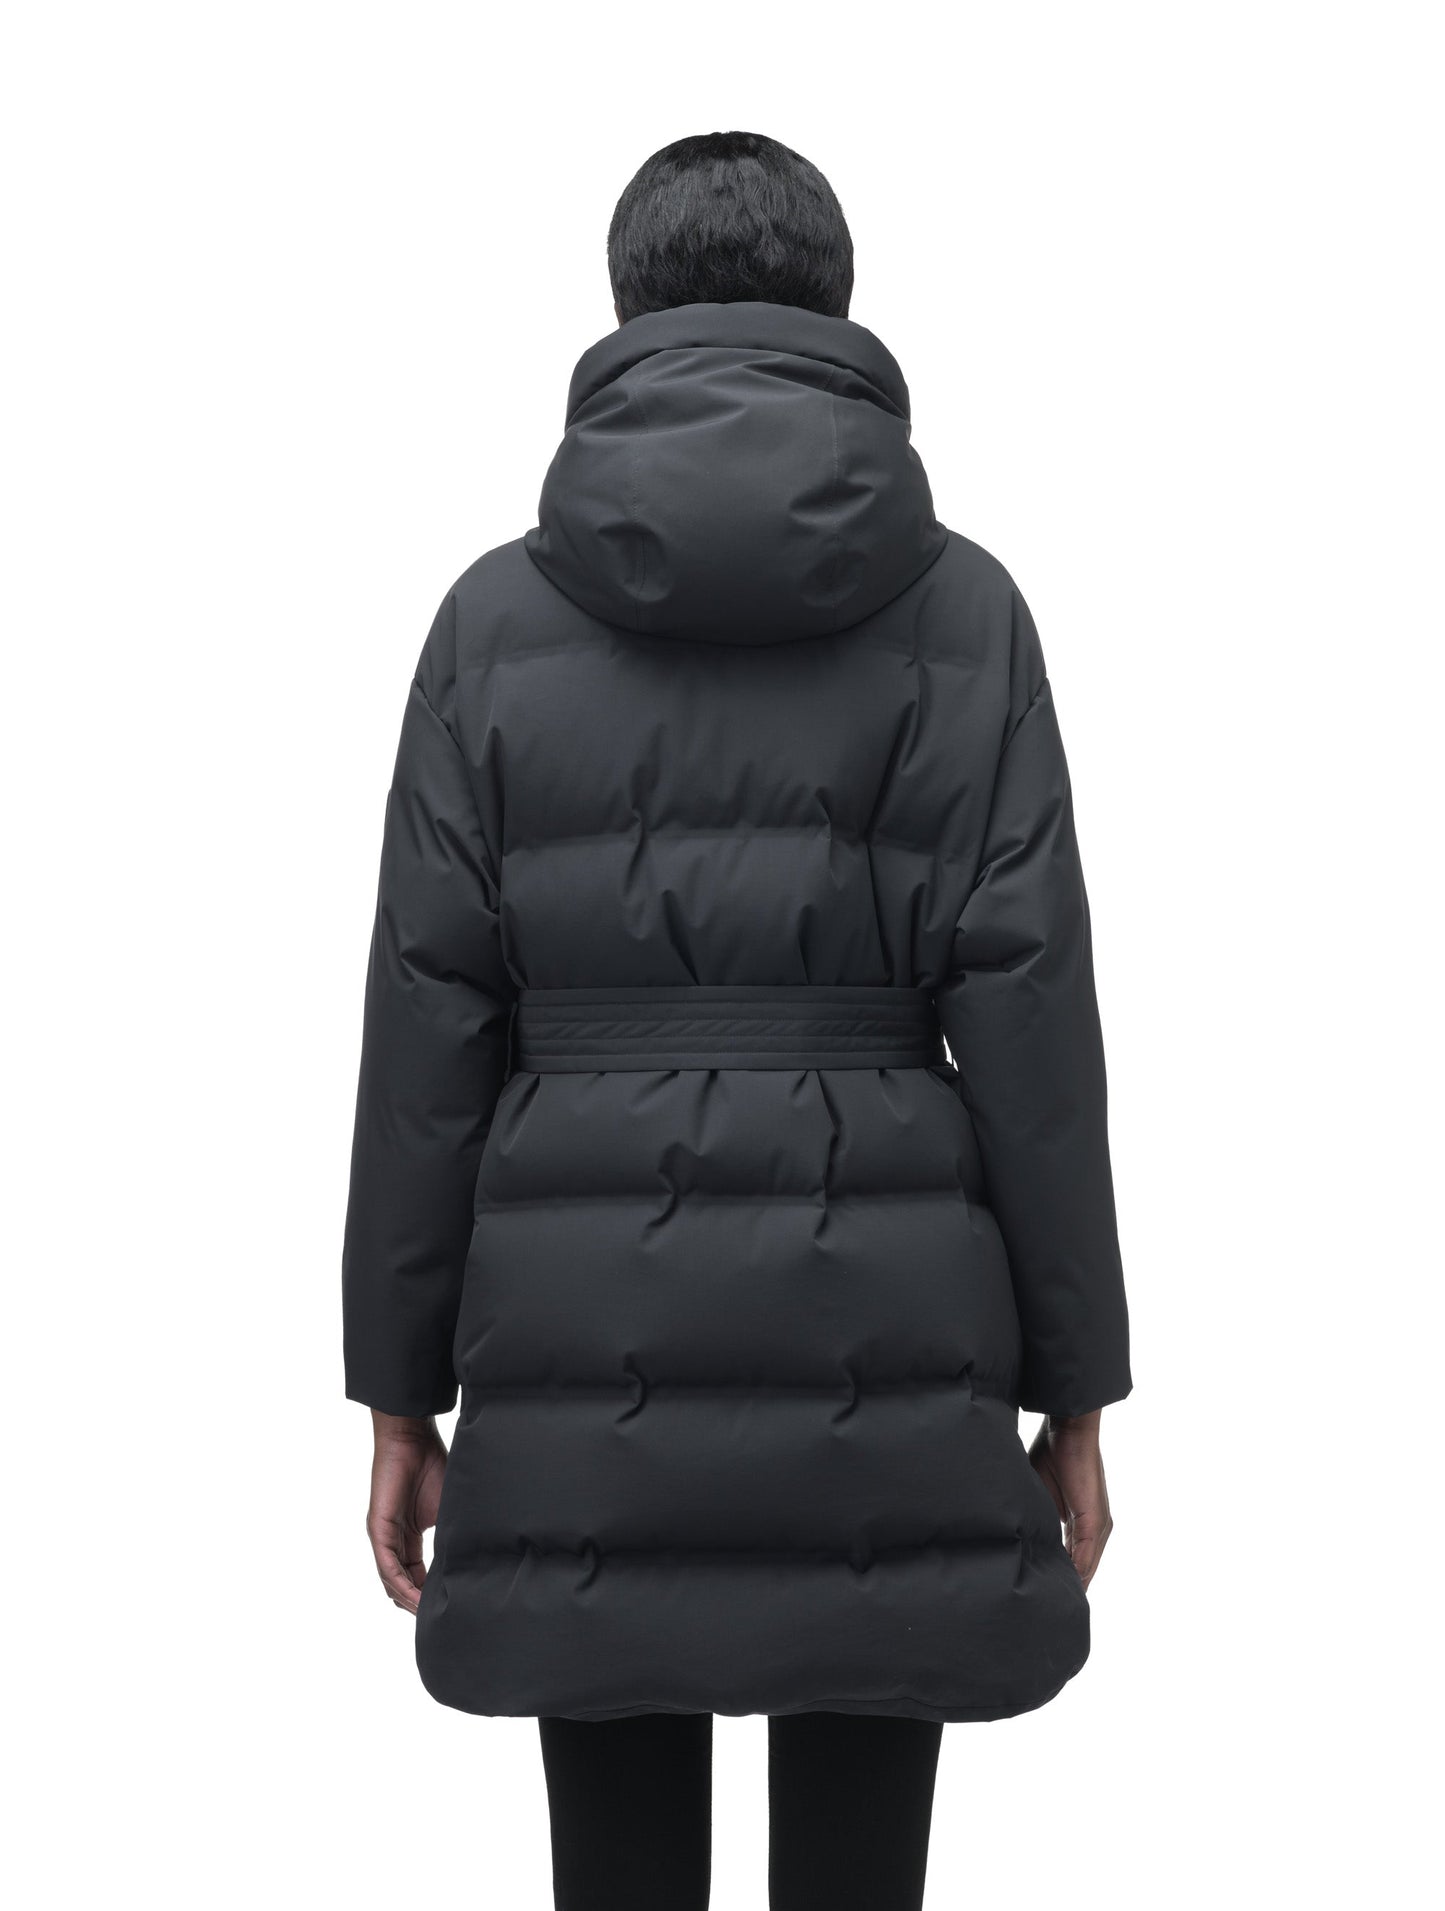 Women's thigh length down parka with removable hood and adjustable belt in Black